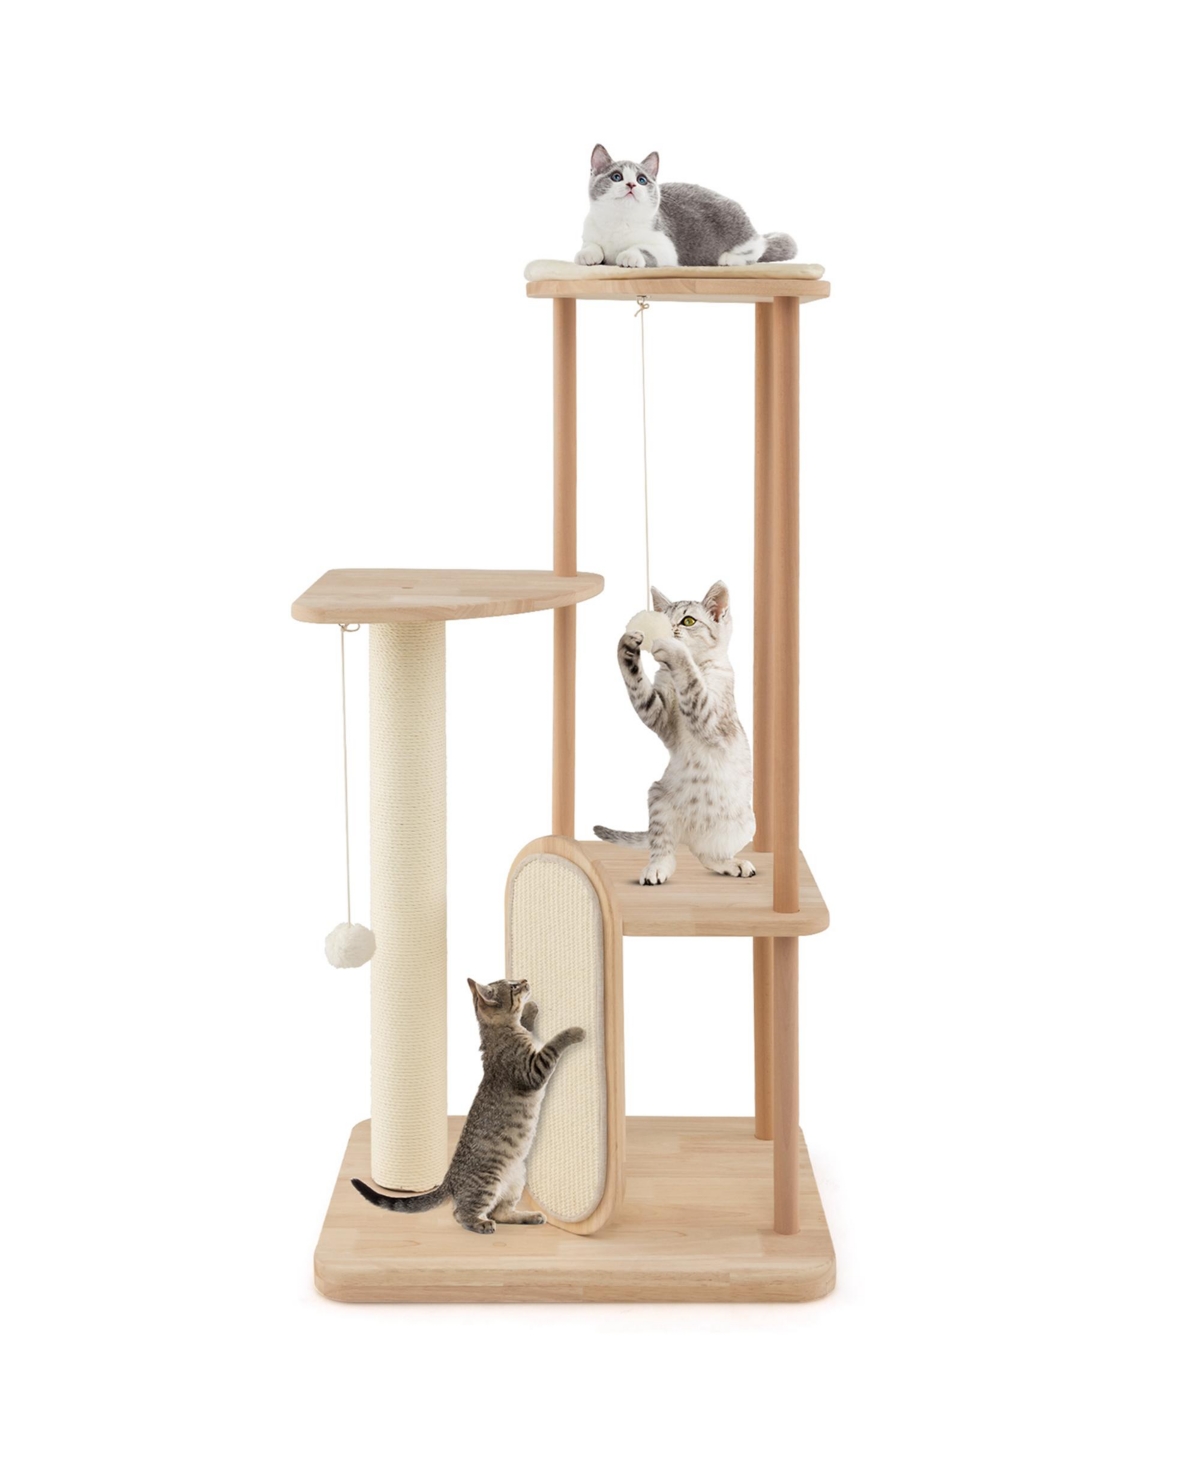 Wooden Cat Tree with Sisal Scratch Board & Post Padded Perch Hanging Toys Modern - Beige/khaki